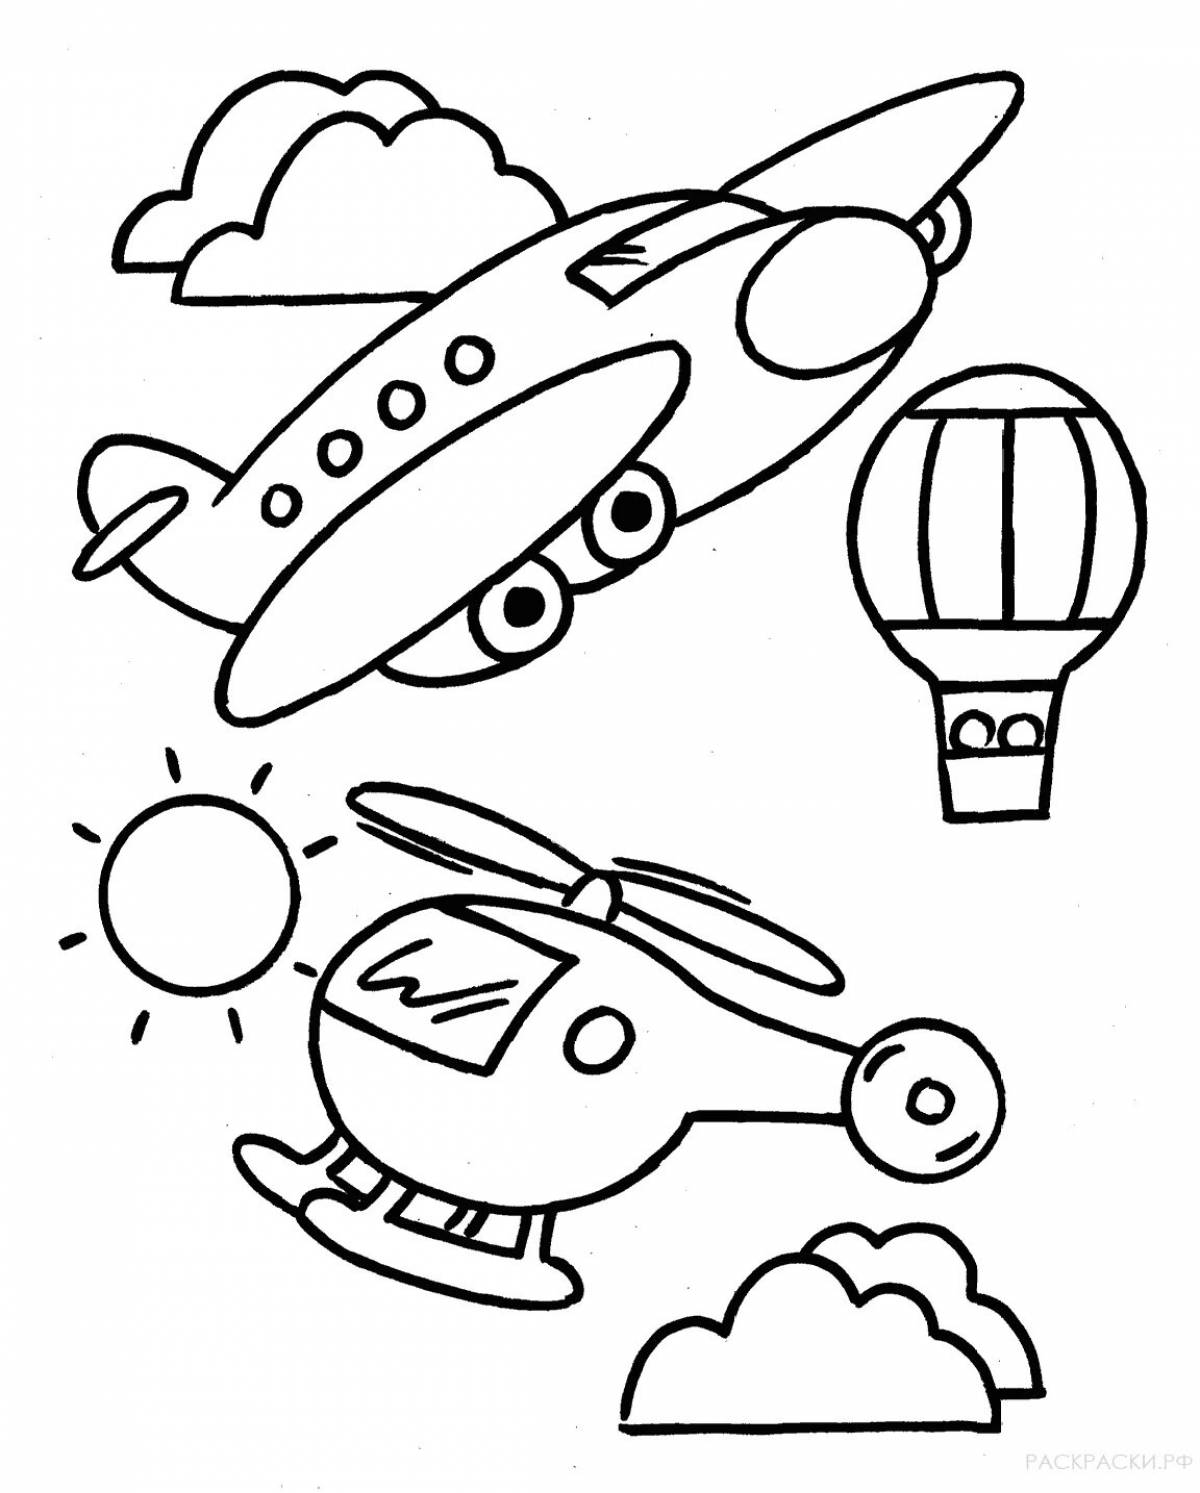 Cute airplane coloring book for kids